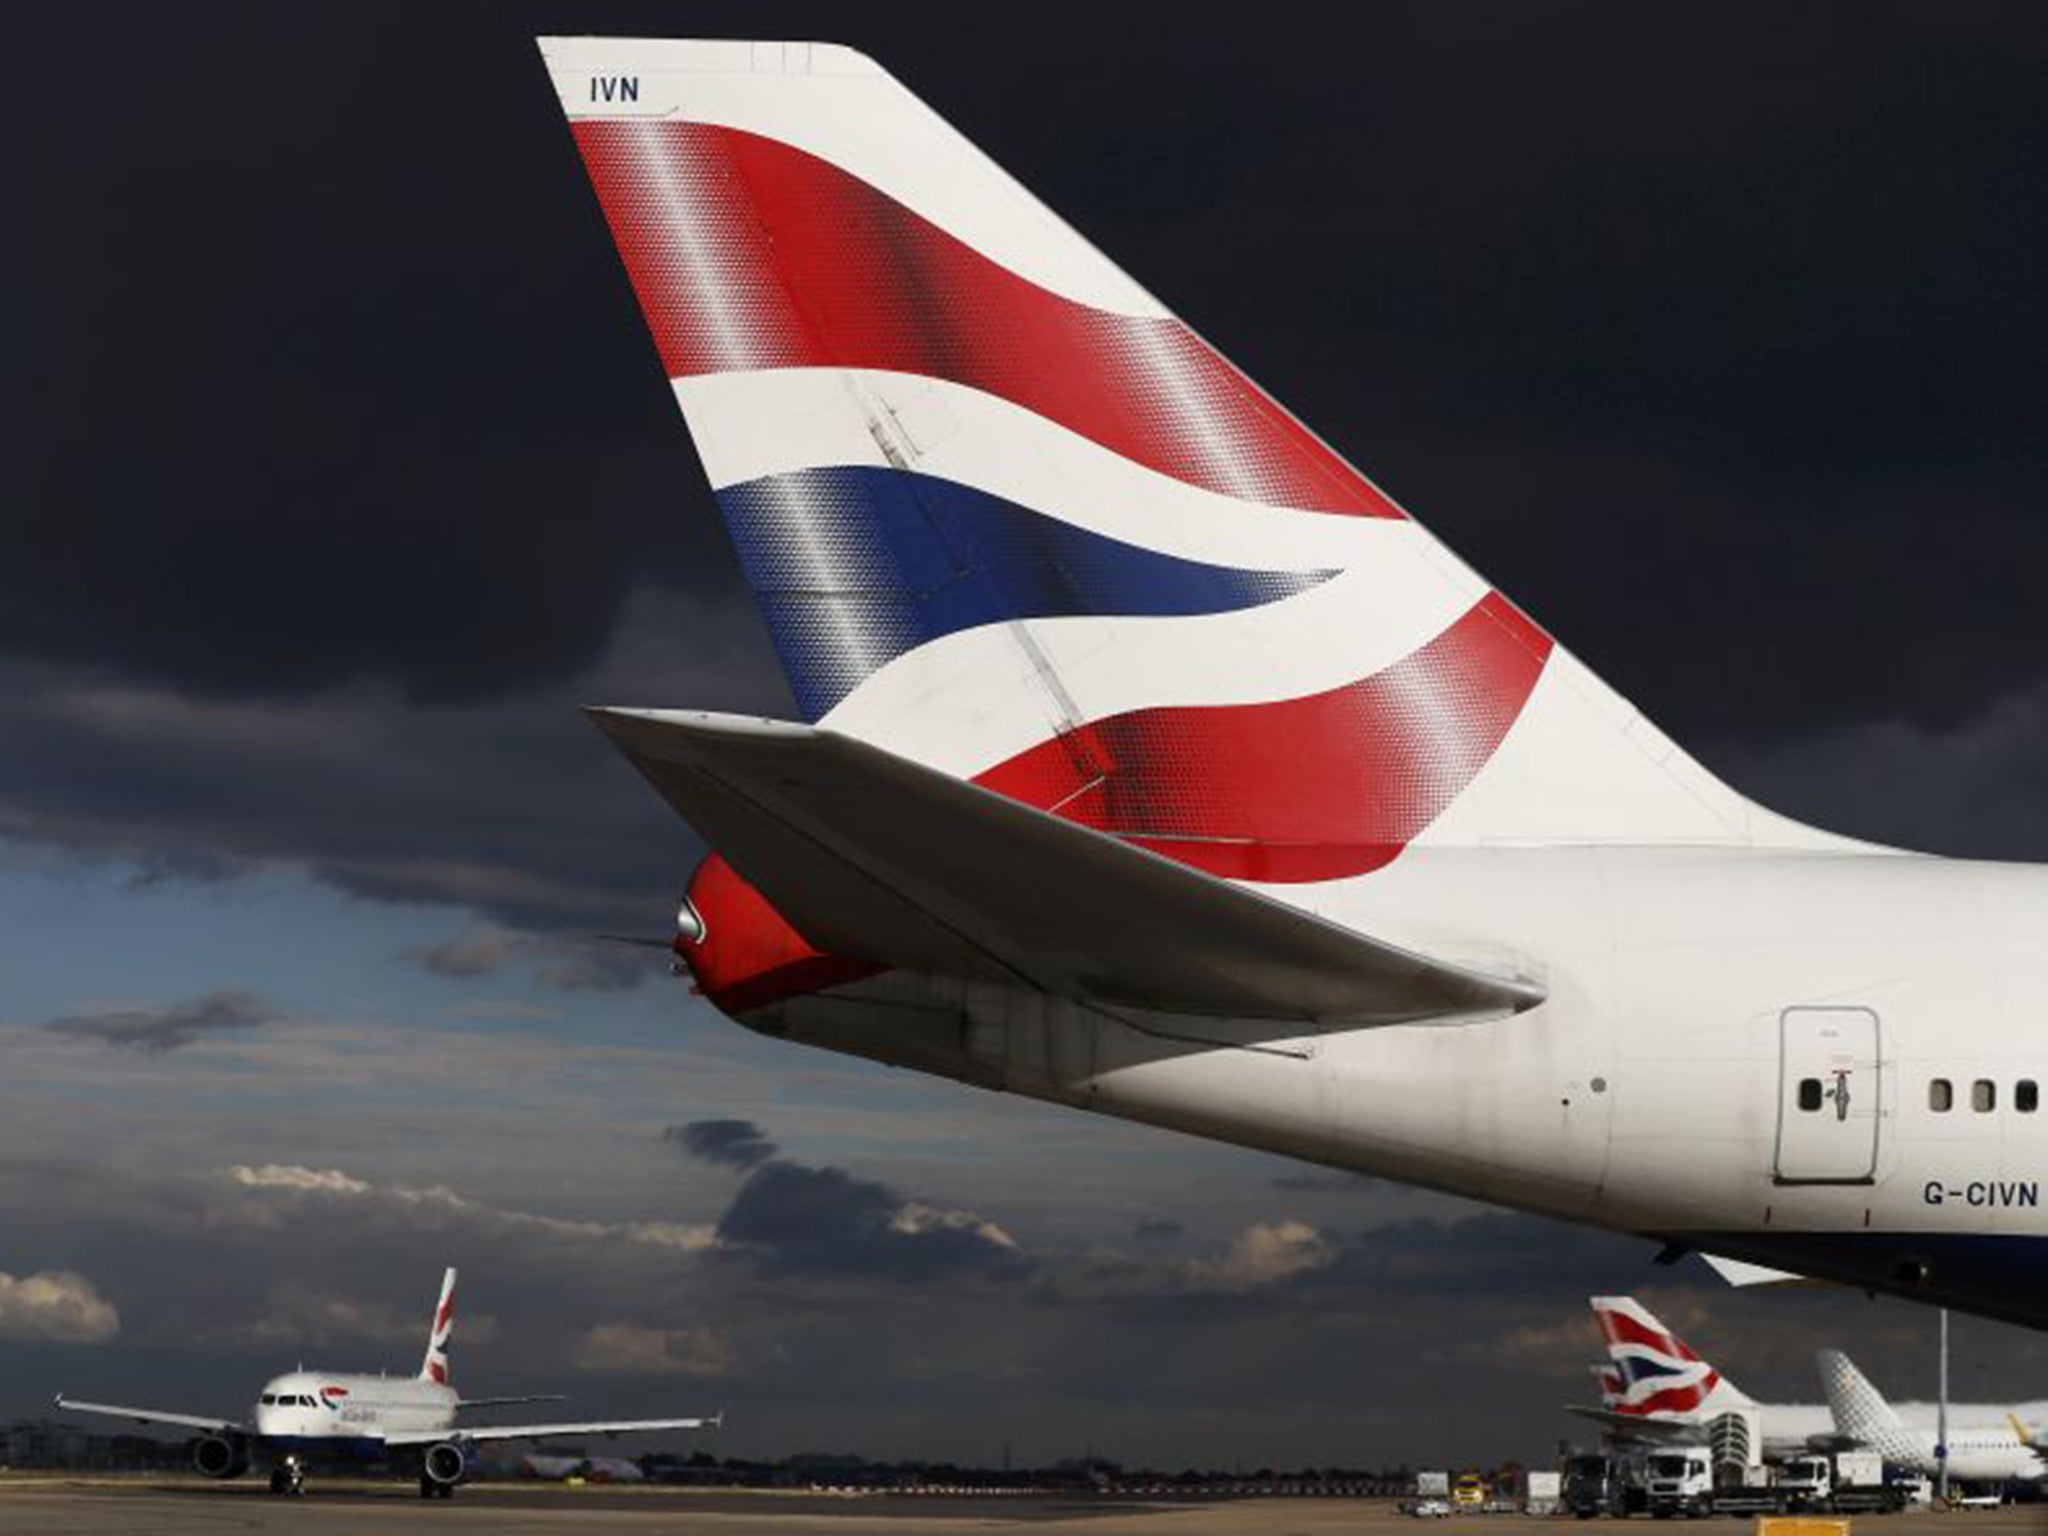 The airline says it will operate a full schedule despite threats of strikes by ‘mixed fleet’ crew